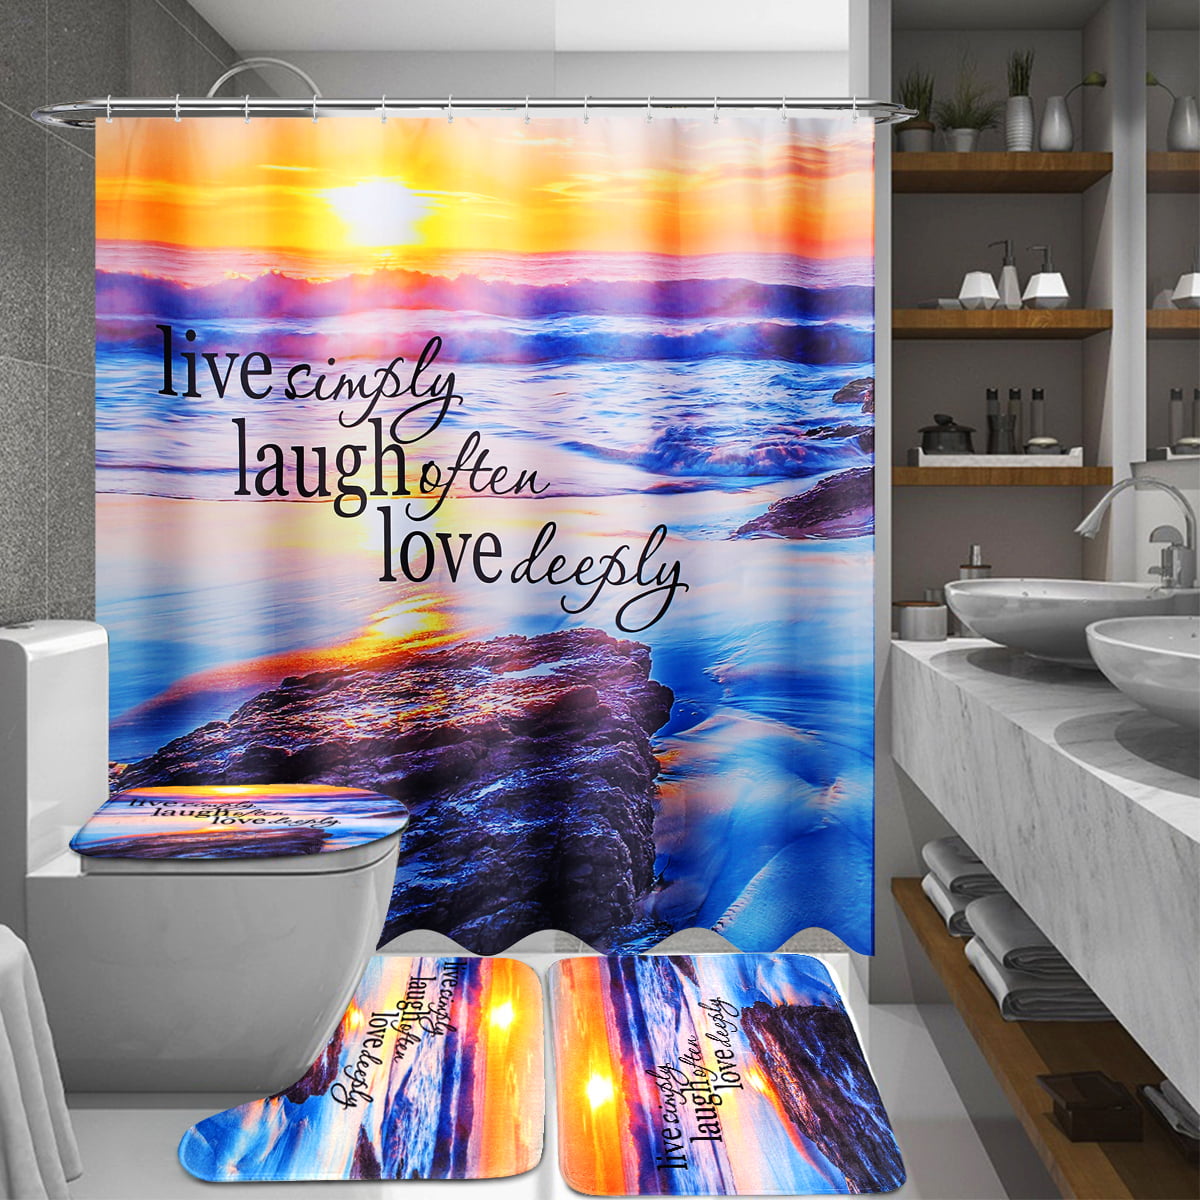 Hugging Lovers Bathroom Shower Curtain Bath Curtains Rugs Toilet Seat Cover Set 